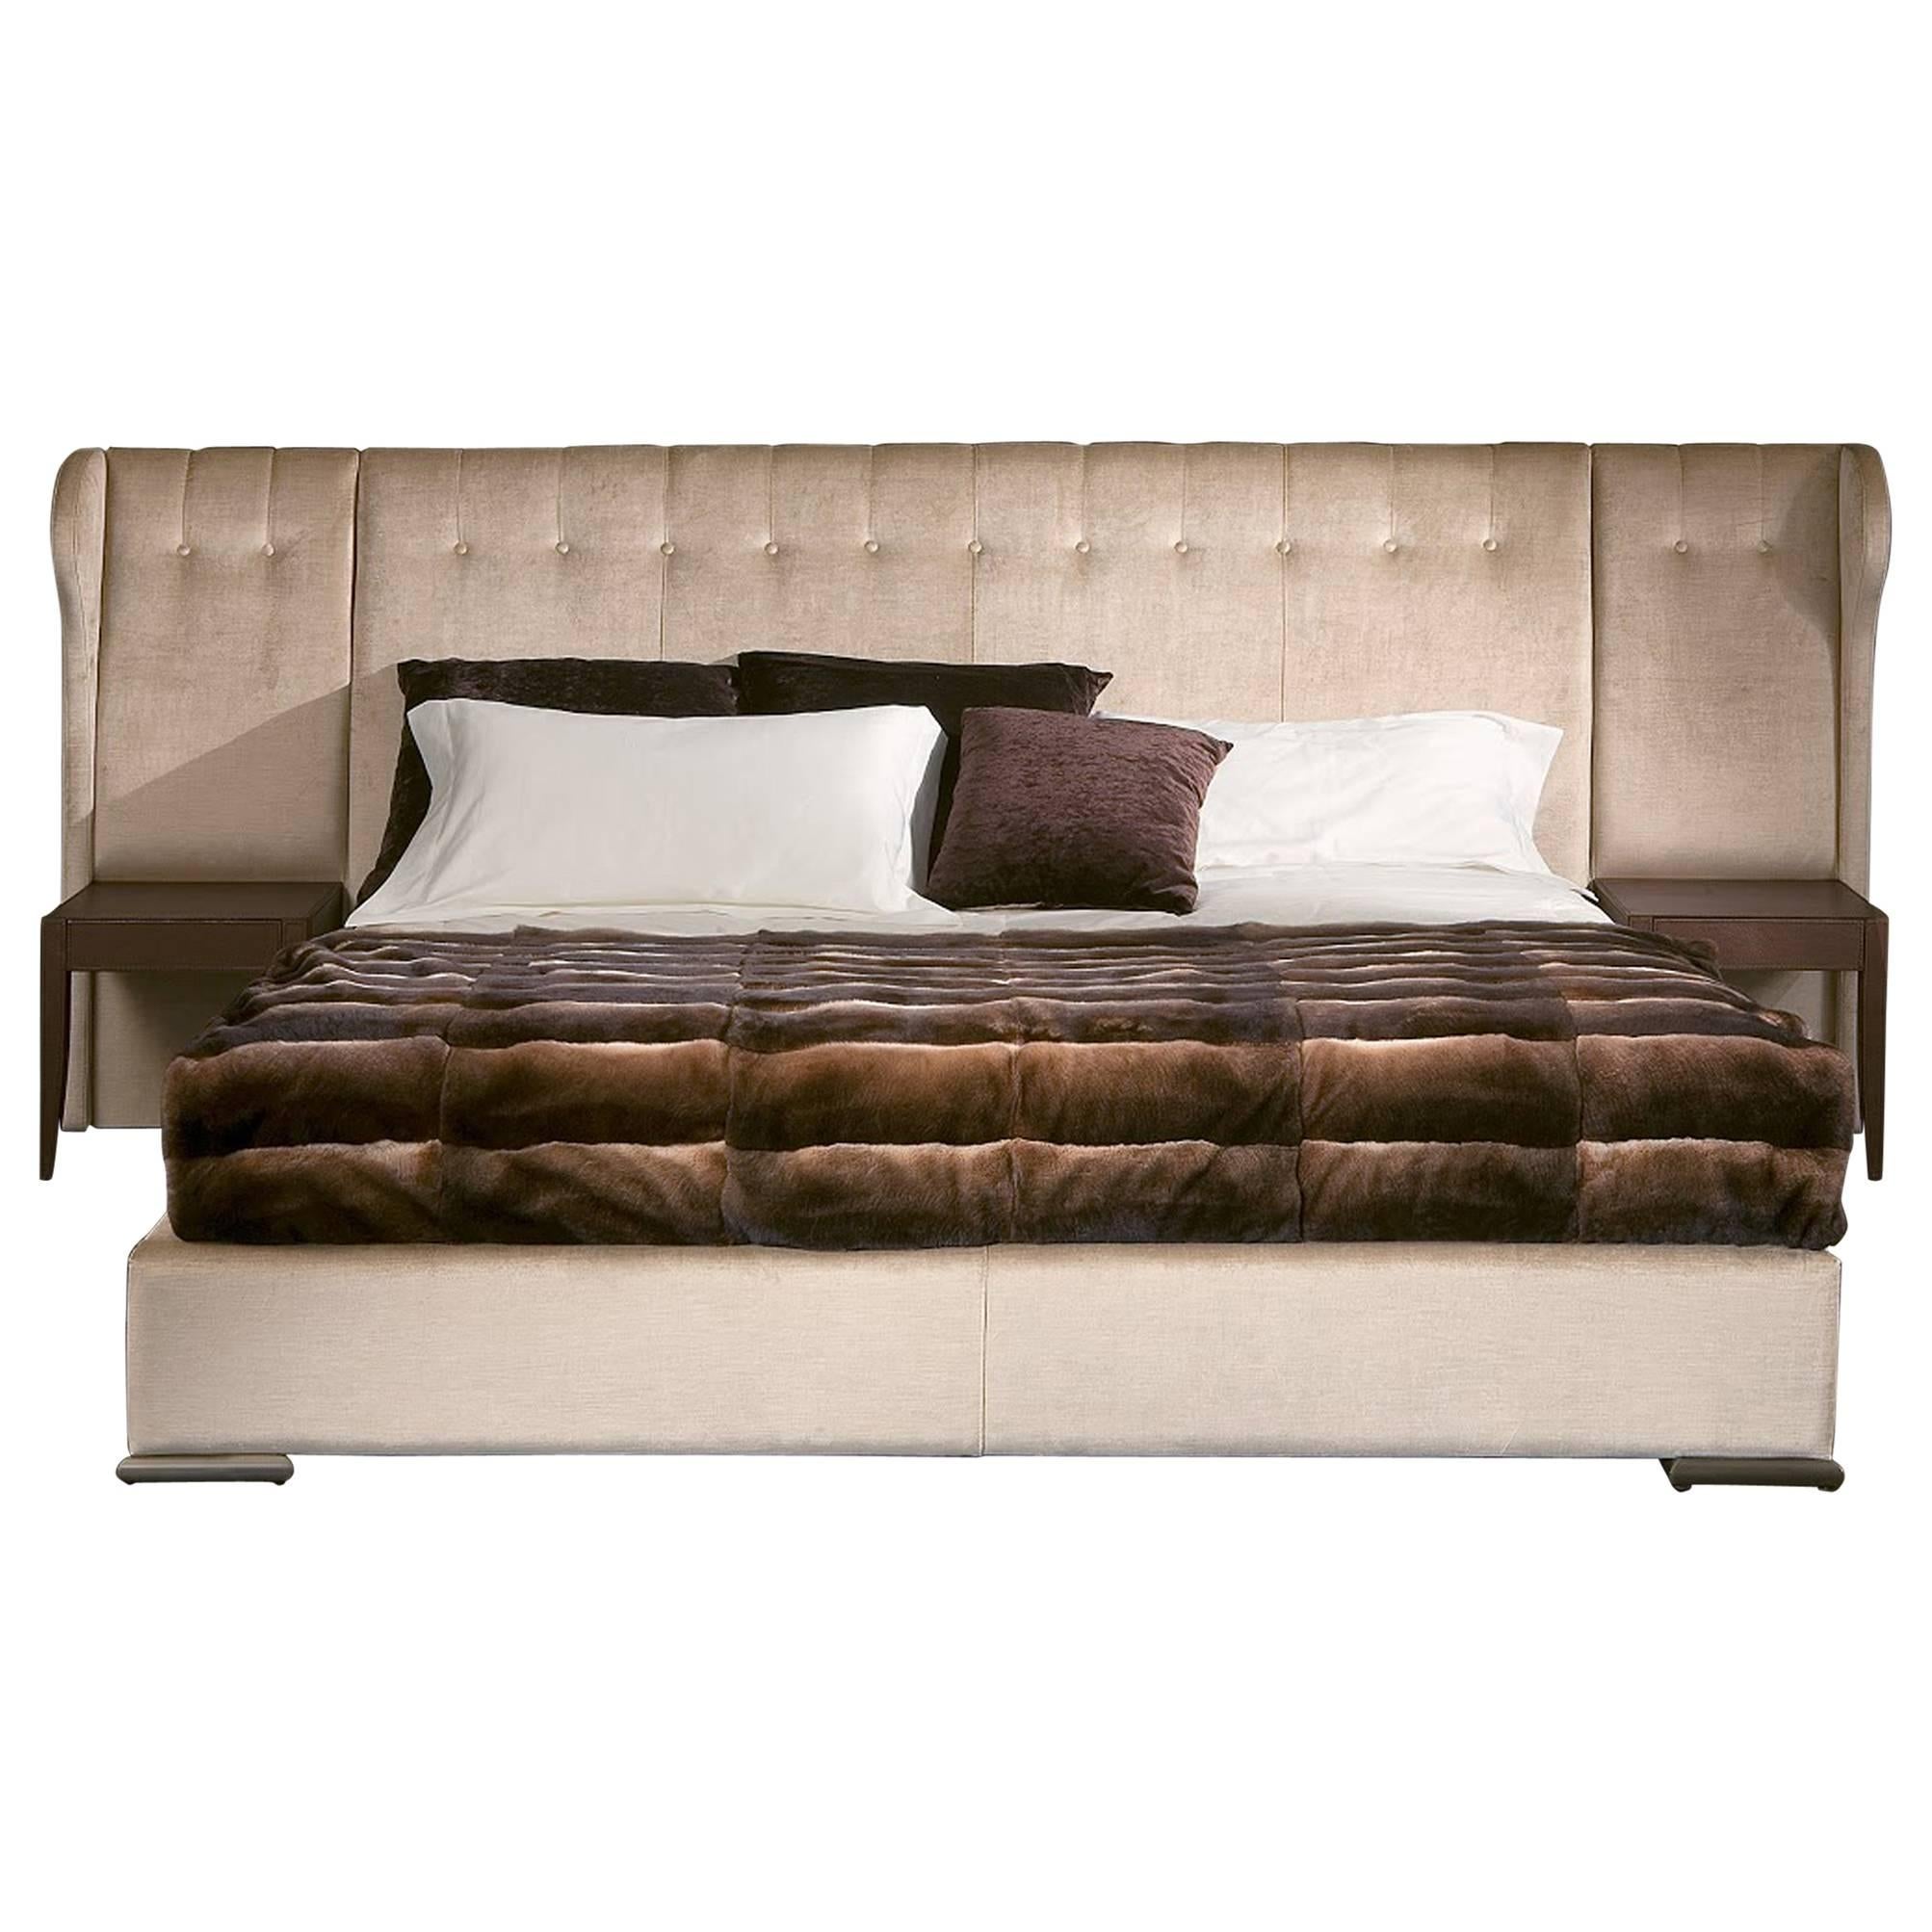 Parma Bed with High Quality Fabric and Night Table Finishing Leather